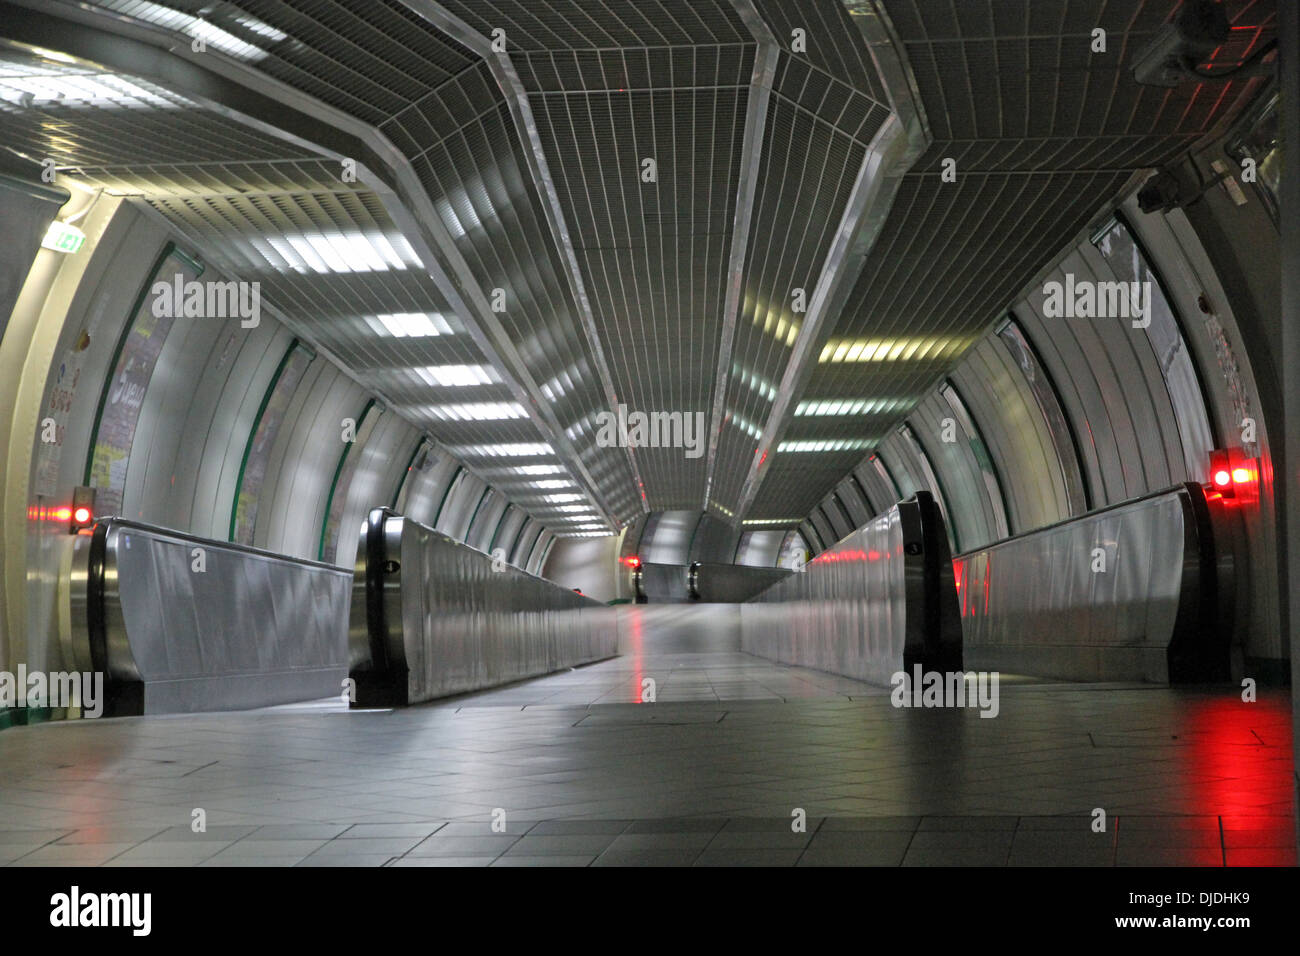 very modern steel escalator inside a terminal of a major metropolis without people Stock Photo